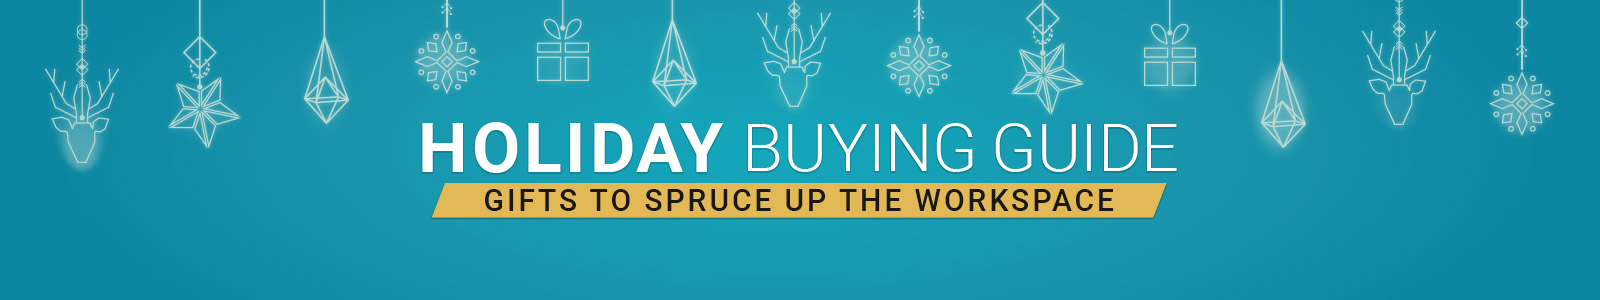 Holiday Buying Guide
Gifts to Spruce up the Workspace
Shop Now